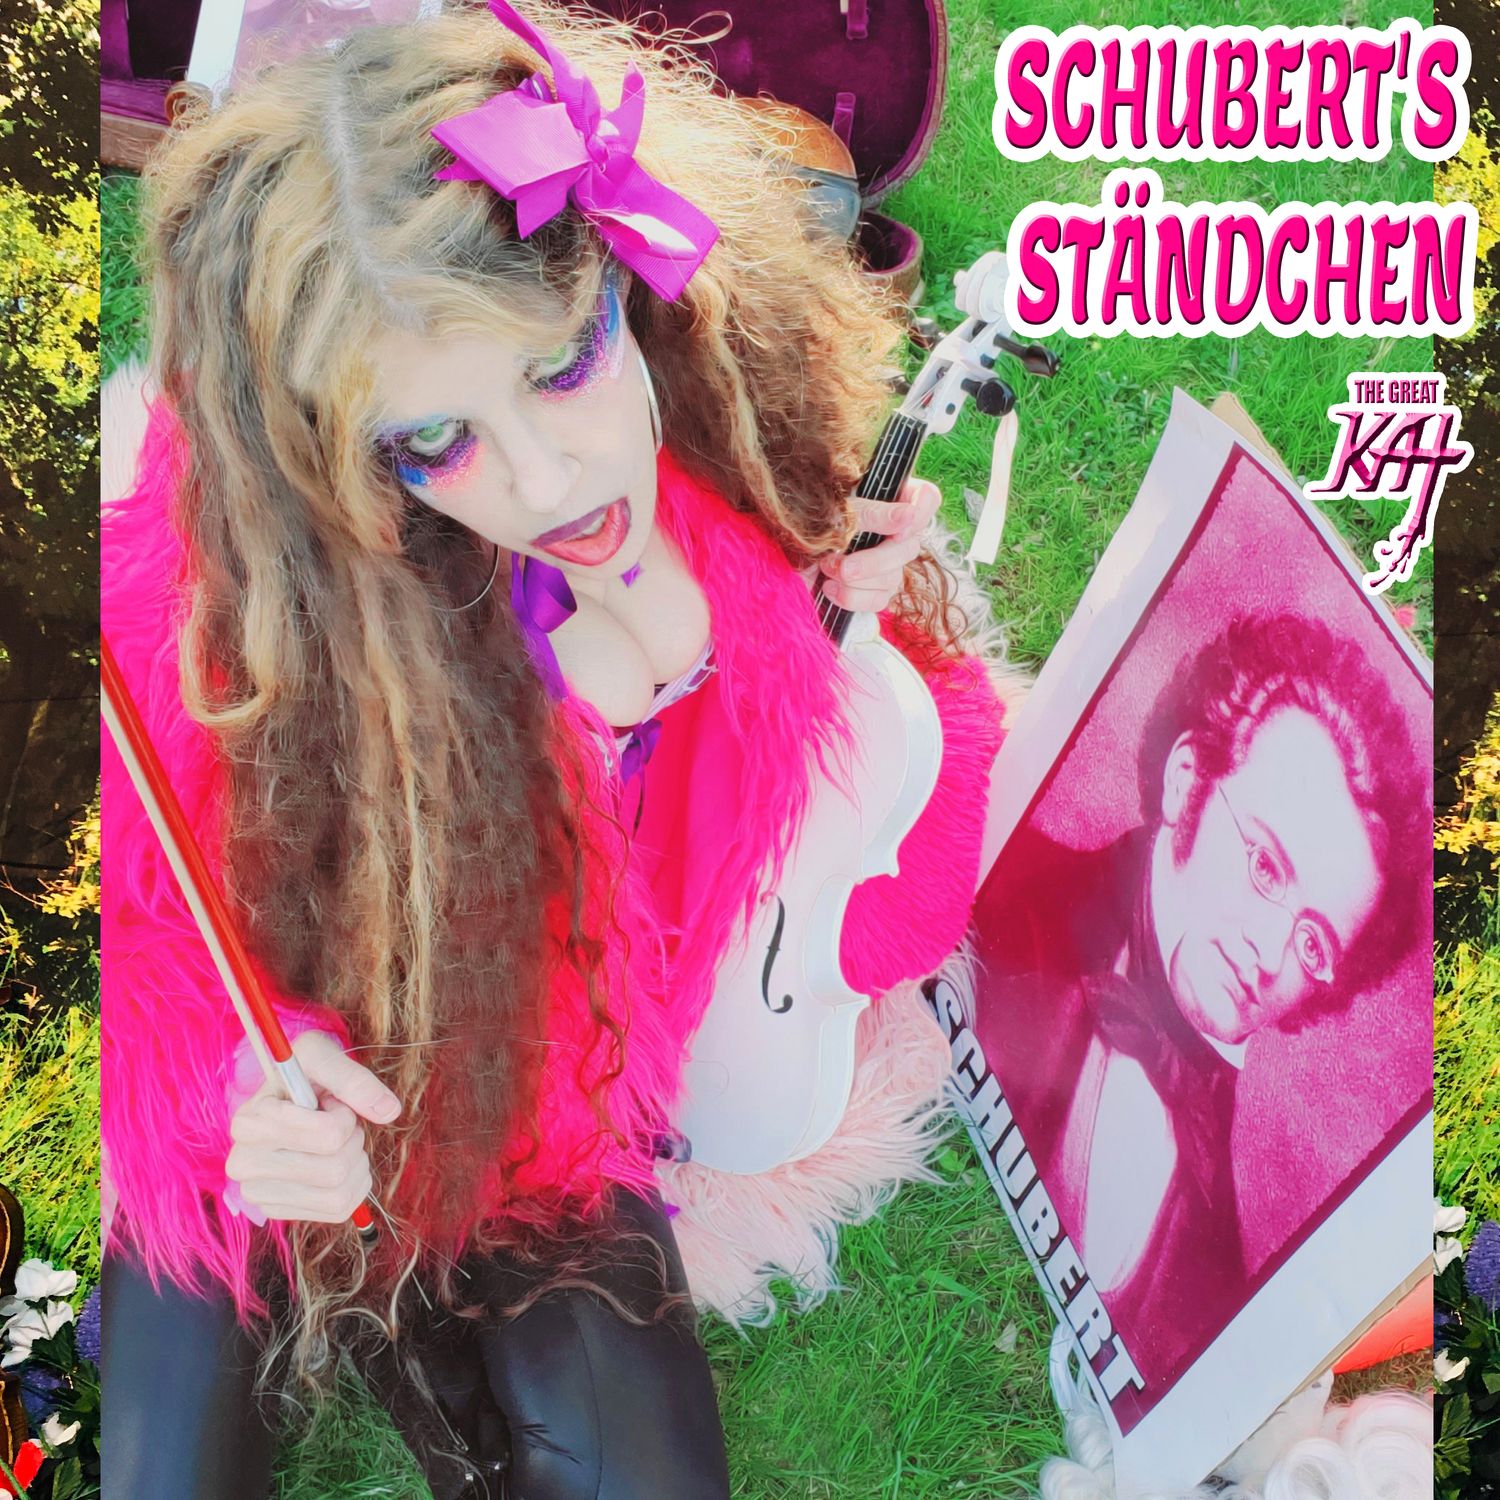 “Schubert’s Ständchen” ! HOT KAT 8x10 Glossy Color Photo! Personalized Autographed by THE GREAT KAT!